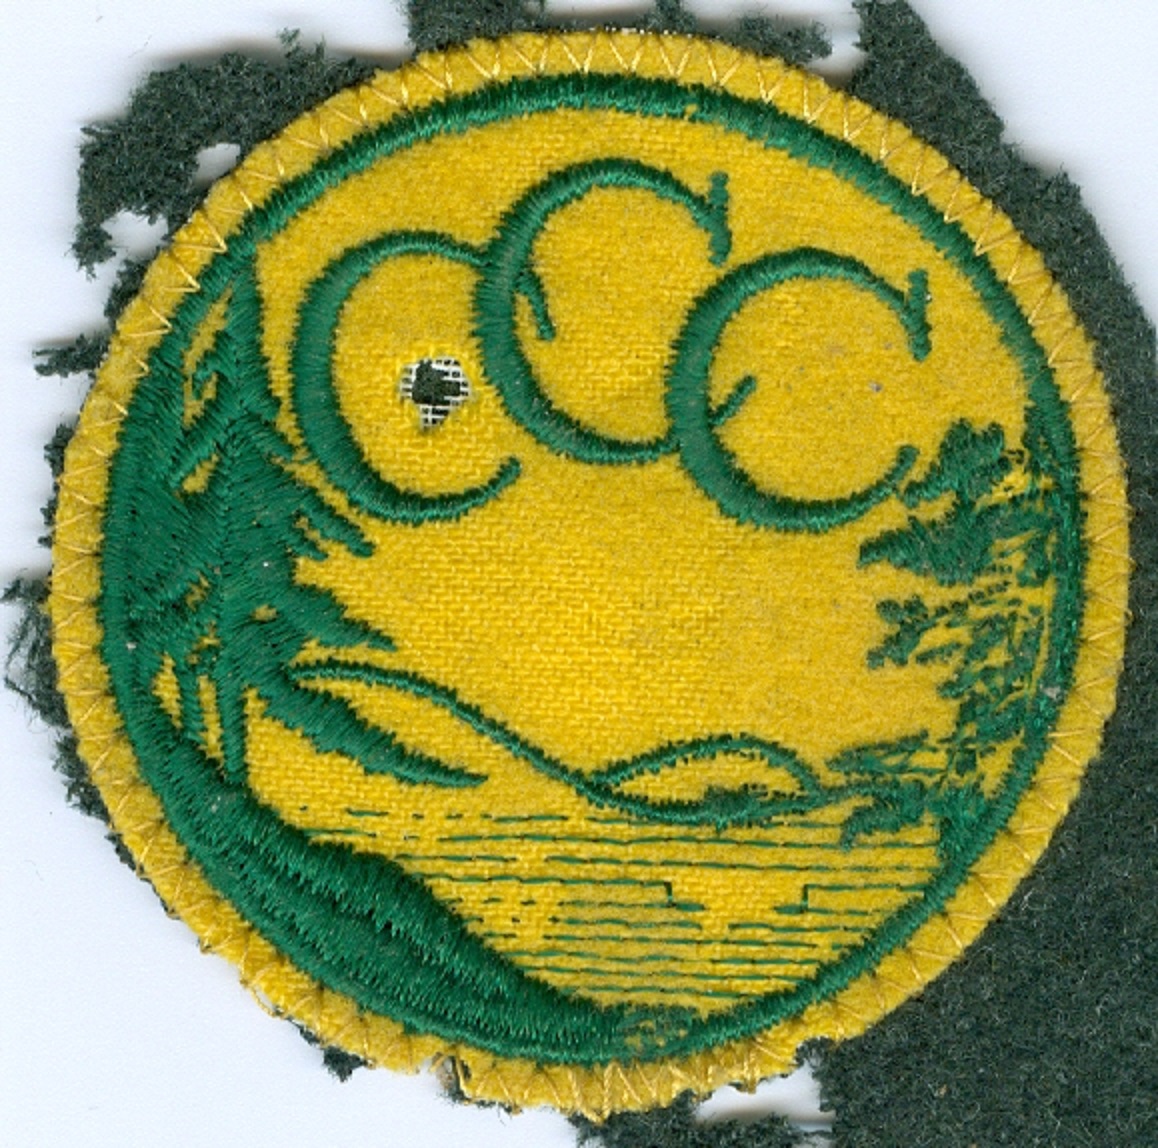 CCC patch from the Leeds CCC Camp